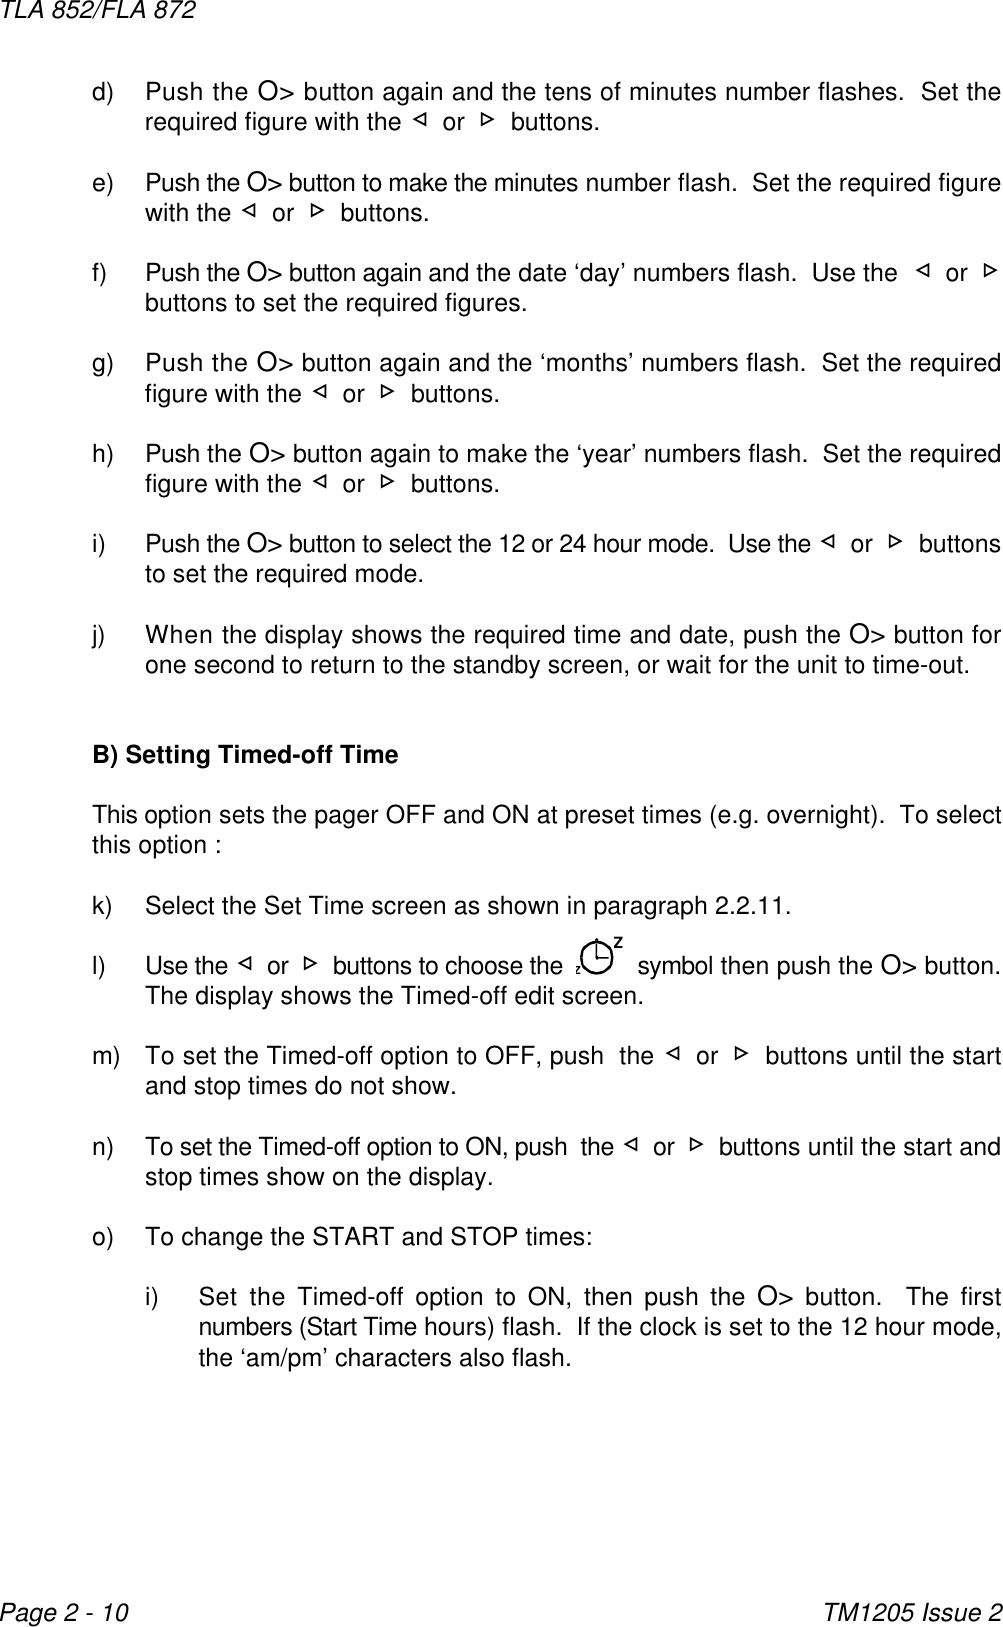 ZZTLA 852/FLA 872TM1205 Issue 2Page 2 - 10d) Push the O&gt; button again and the tens of minutes number flashes.  Set therequired figure with the ¬ or - buttons.e) Push the O&gt; button to make the minutes number flash.  Set the required figurewith the ¬ or - buttons.  f) Push the O&gt; button again and the date ‘day’ numbers flash.  Use the  ¬ or -buttons to set the required figures.  g) Push the O&gt; button again and the ‘months’ numbers flash.  Set the requiredfigure with the ¬ or - buttons.h) Push the O&gt; button again to make the ‘year’ numbers flash.  Set the requiredfigure with the ¬ or - buttons.i) Push the O&gt; button to select the 12 or 24 hour mode.  Use the ¬ or - buttonsto set the required mode.j) When the display shows the required time and date, push the O&gt; button forone second to return to the standby screen, or wait for the unit to time-out.B) Setting Timed-off TimeThis option sets the pager OFF and ON at preset times (e.g. overnight).  To selectthis option :k) Select the Set Time screen as shown in paragraph 2.2.11.l) Use the ¬ or - buttons to choose the     symbol then push the O&gt; button.The display shows the Timed-off edit screen.m) To set the Timed-off option to OFF, push  the ¬ or - buttons until the startand stop times do not show.n) To set the Timed-off option to ON, push  the ¬ or - buttons until the start andstop times show on the display.o) To change the START and STOP times:i) Set the Timed-off option to ON, then push the O&gt; button.  The firstnumbers (Start Time hours) flash.  If the clock is set to the 12 hour mode,the ‘am/pm’ characters also flash.